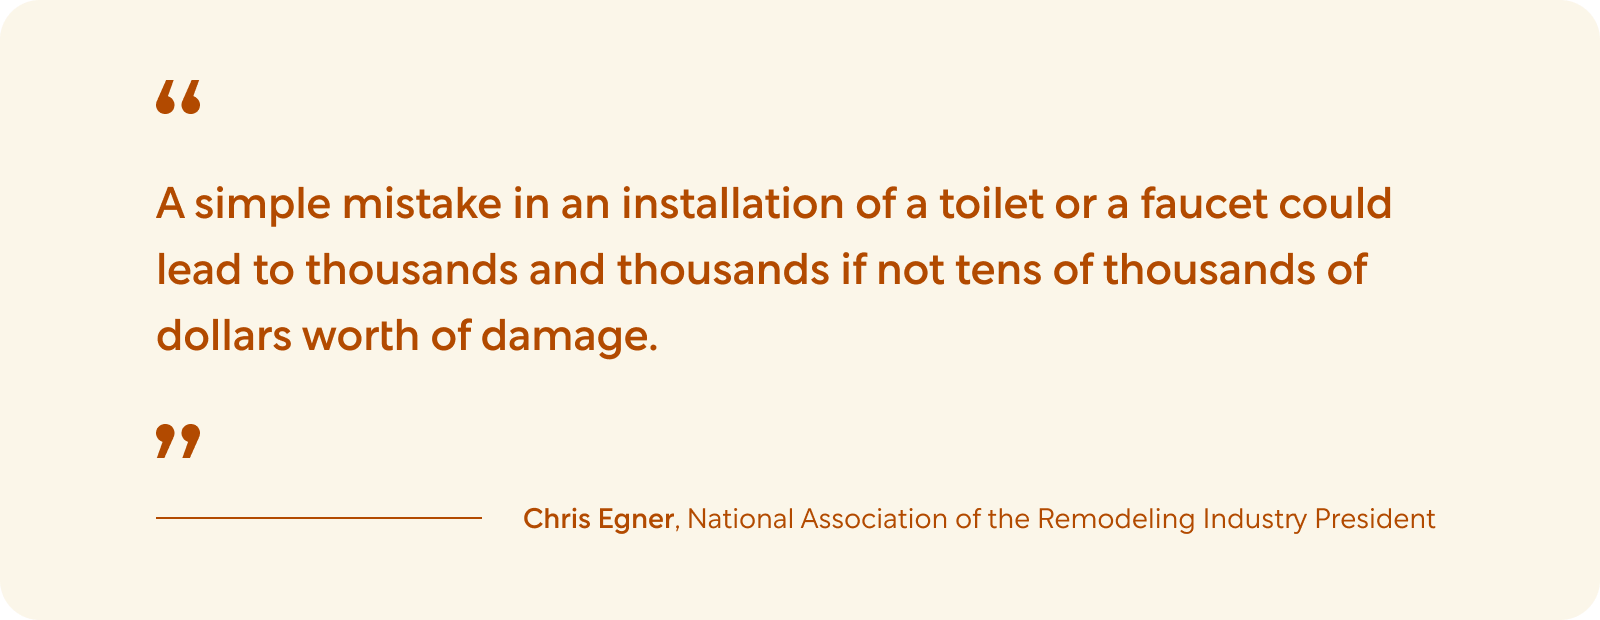 Quote from Chris Egner, National Association of the Remodeling Industry President